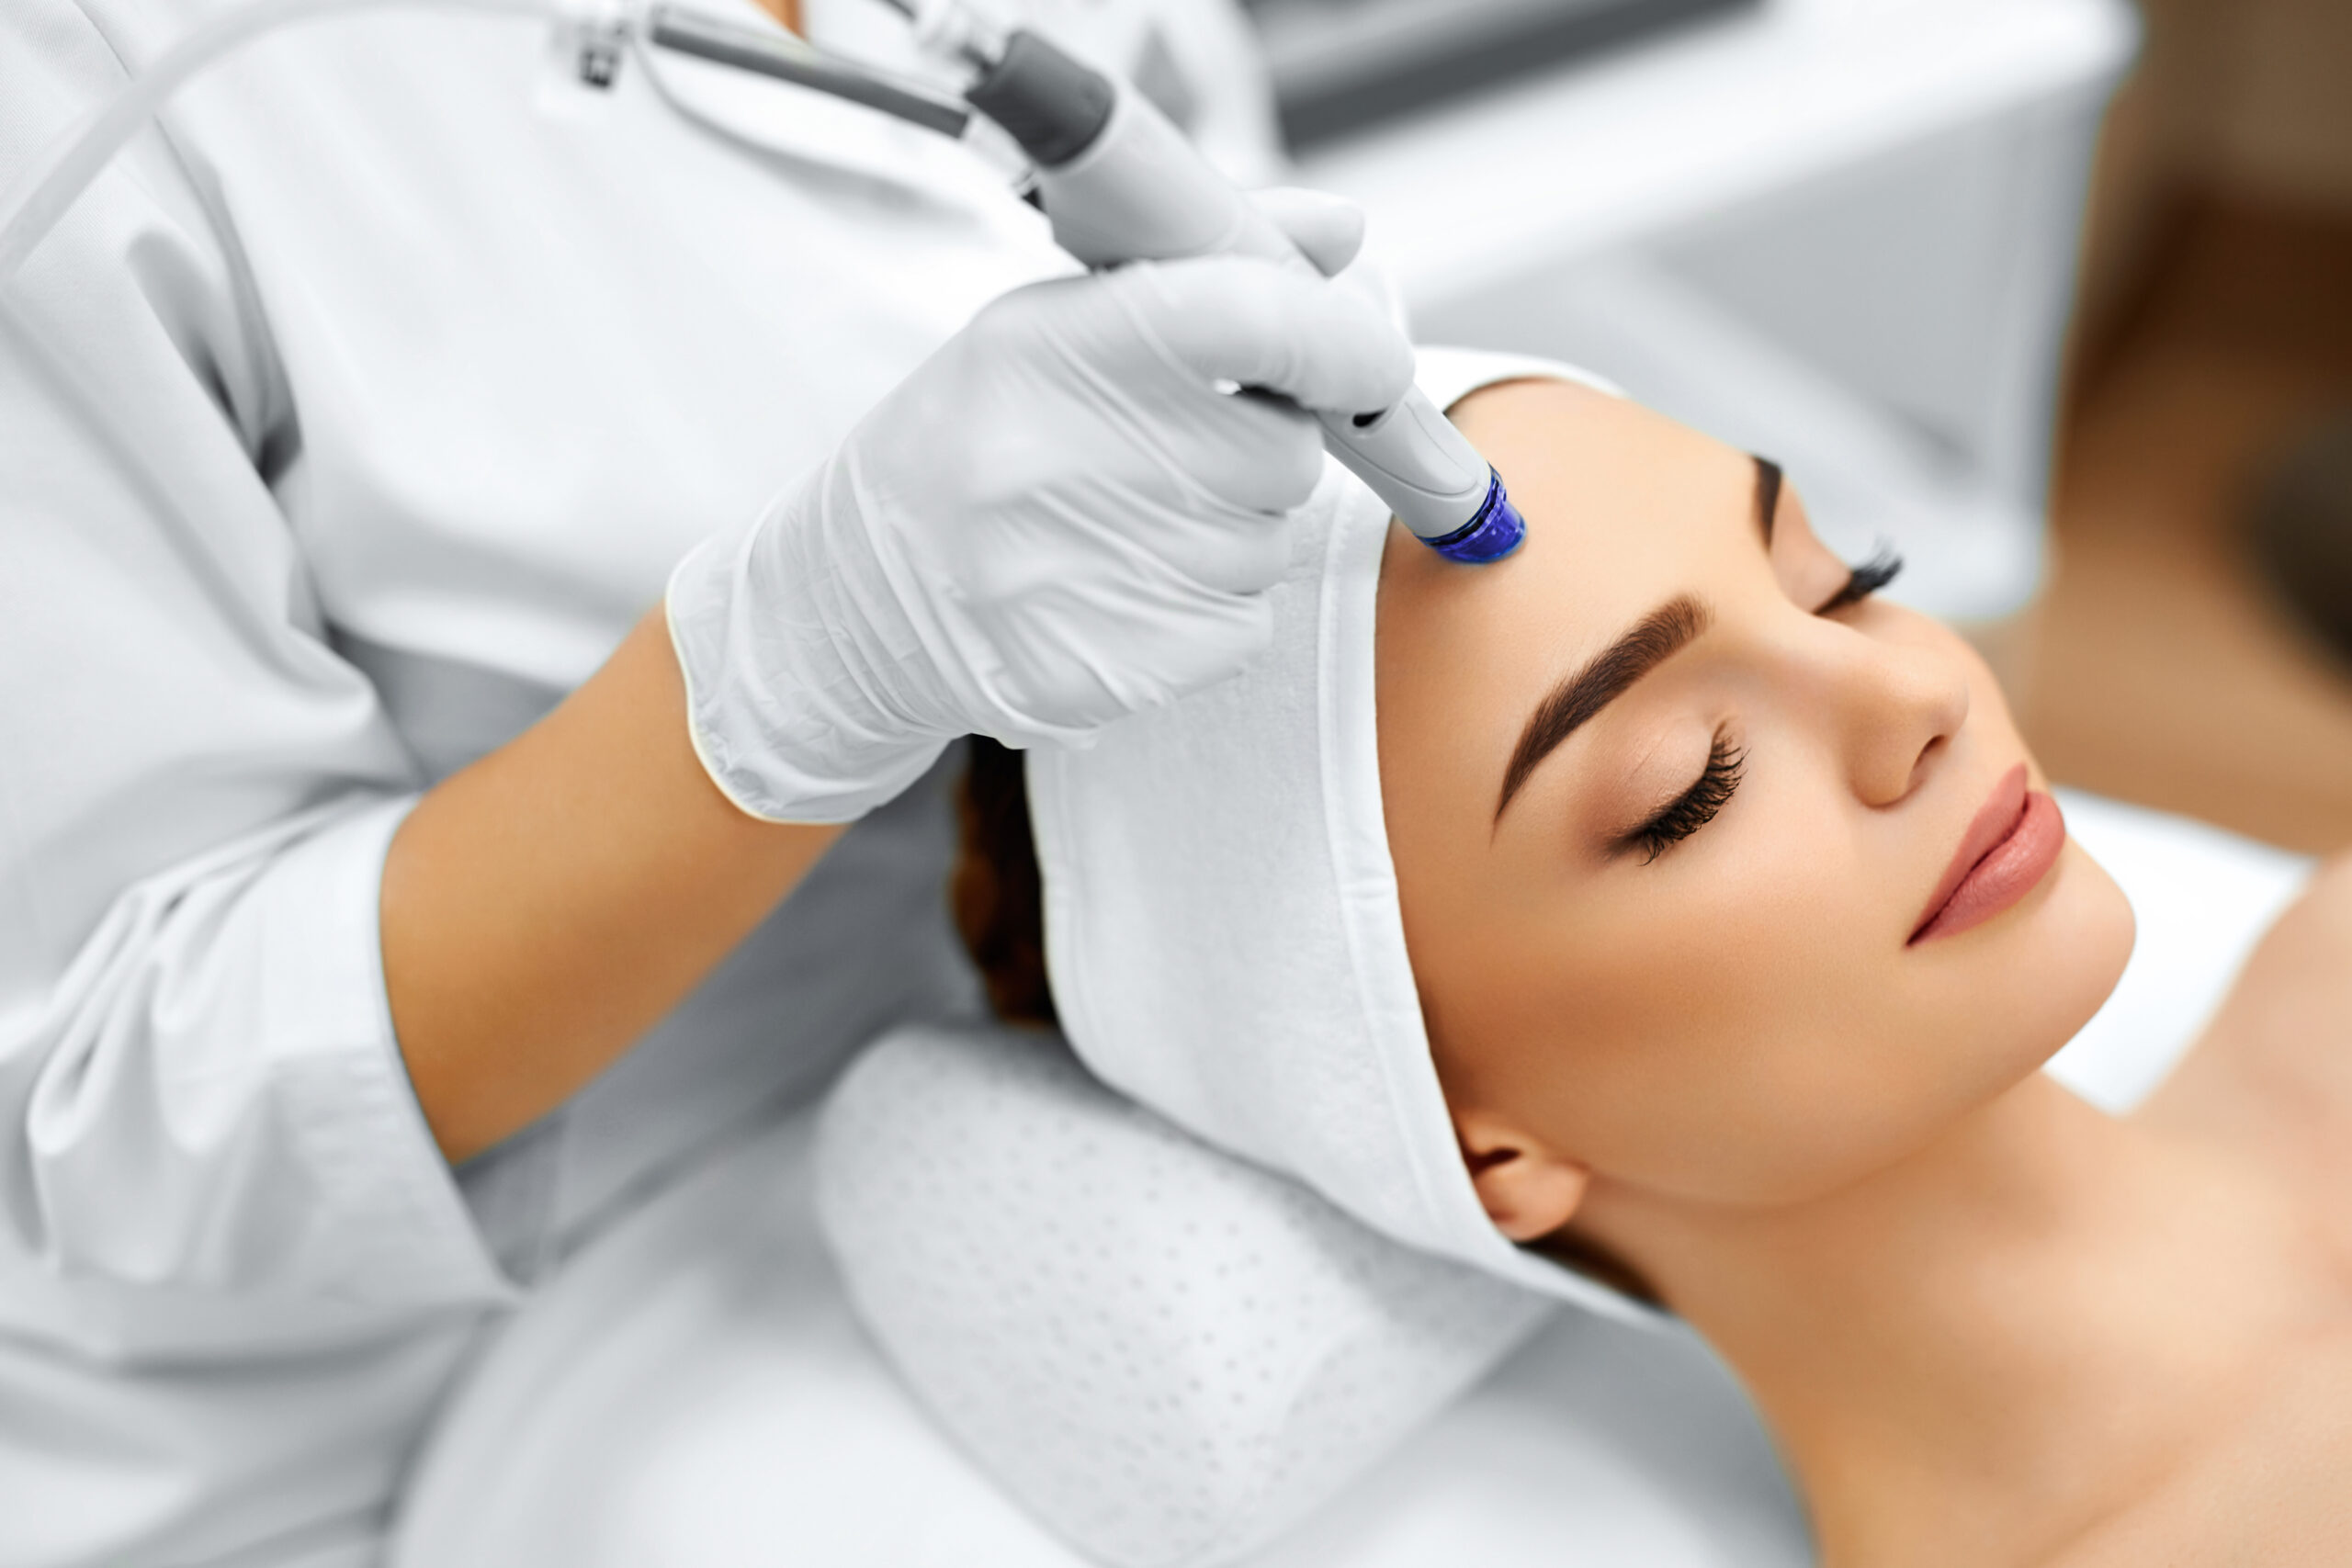 Rf micro needling by Concentus LLC in Northborough MA | Best Medical Spa in Northborough, MA